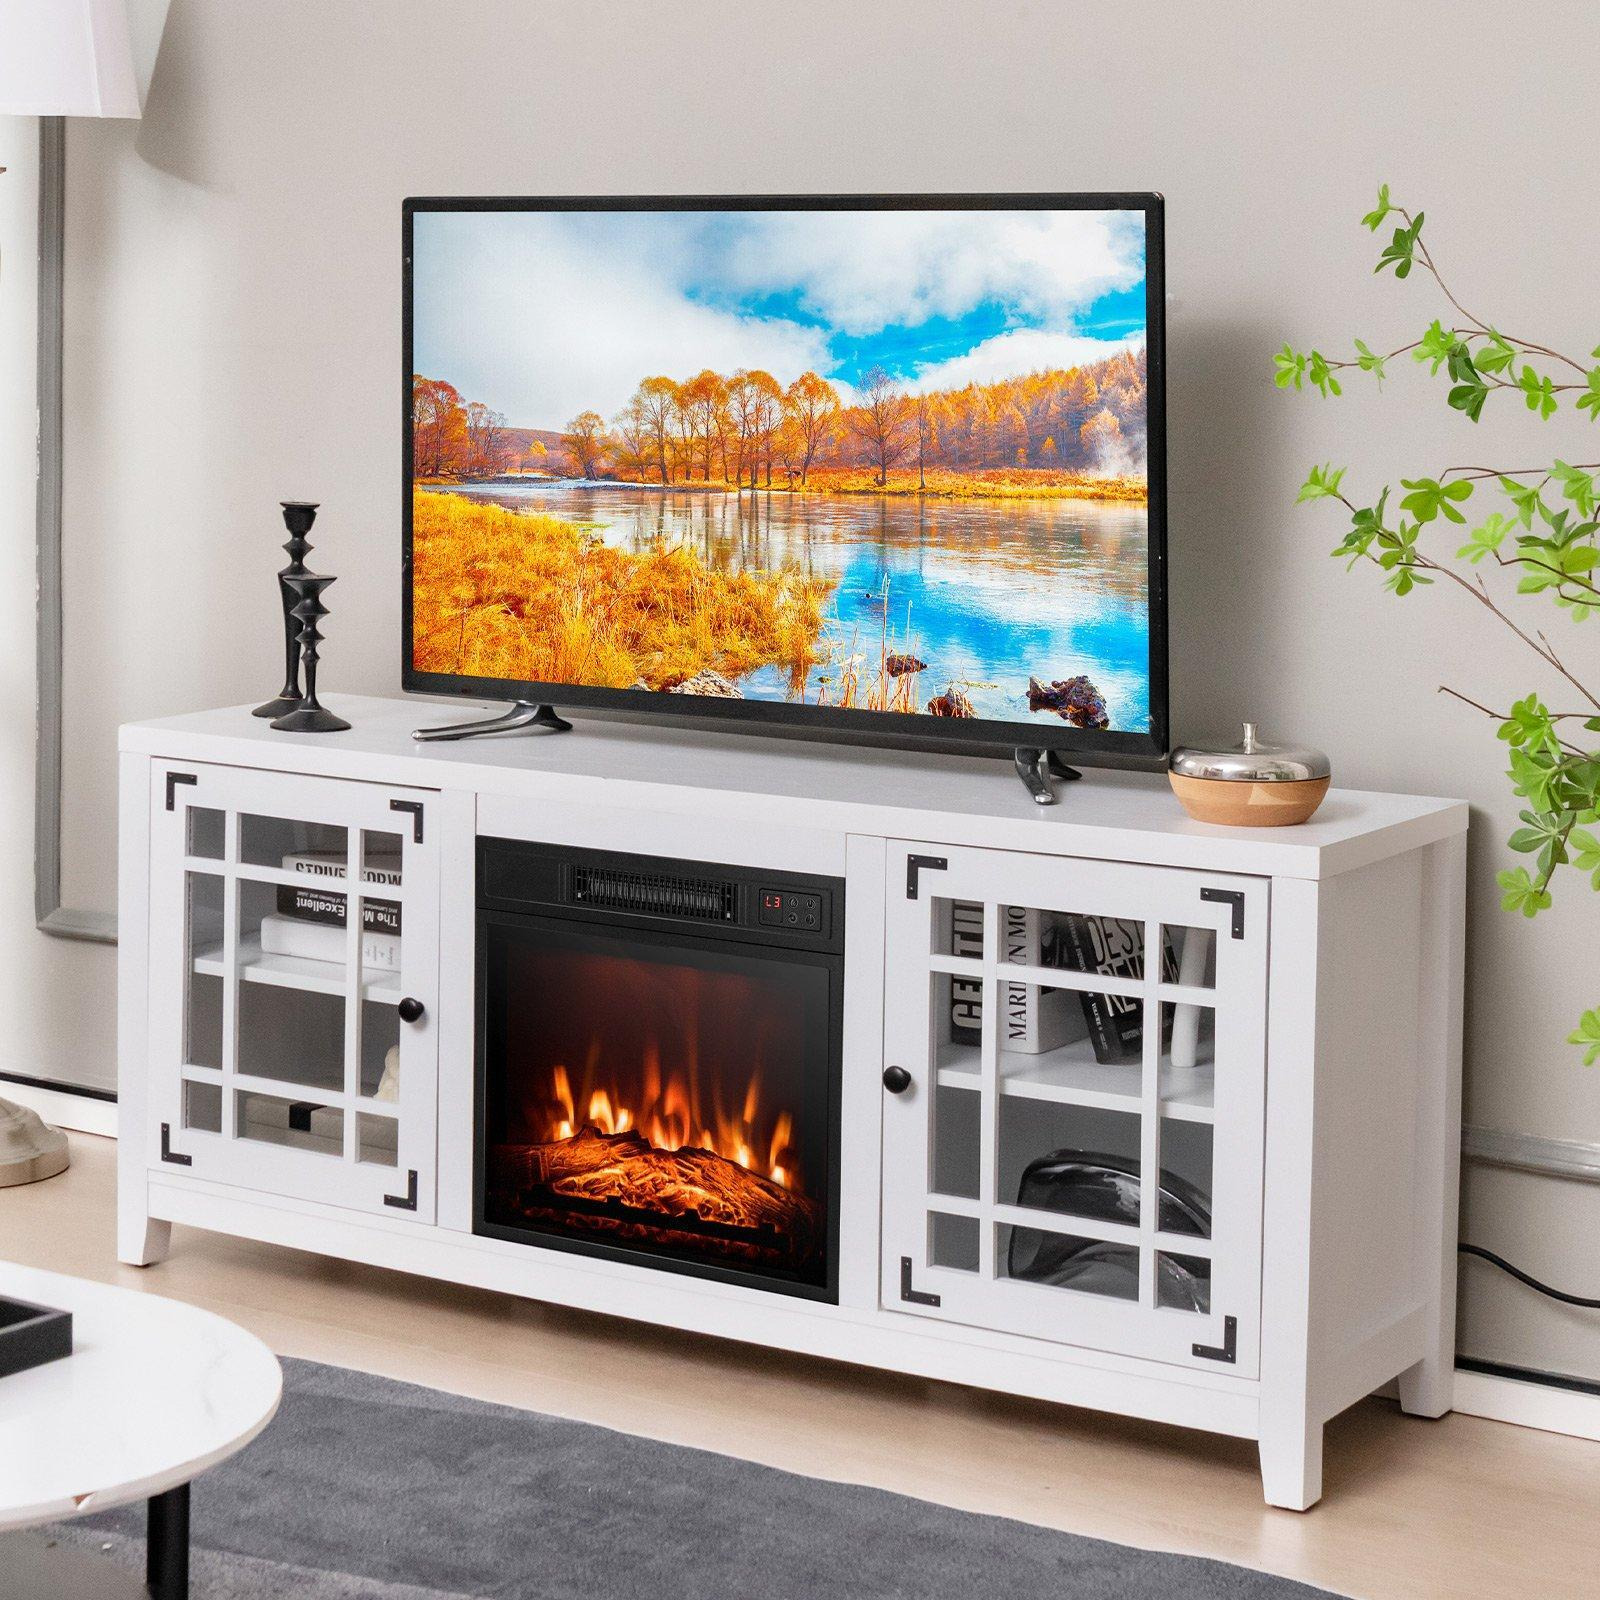 Fireplace TV Stand for TVs up to 65 Inches W/ 2000W Electric Fireplace Insert - image 1